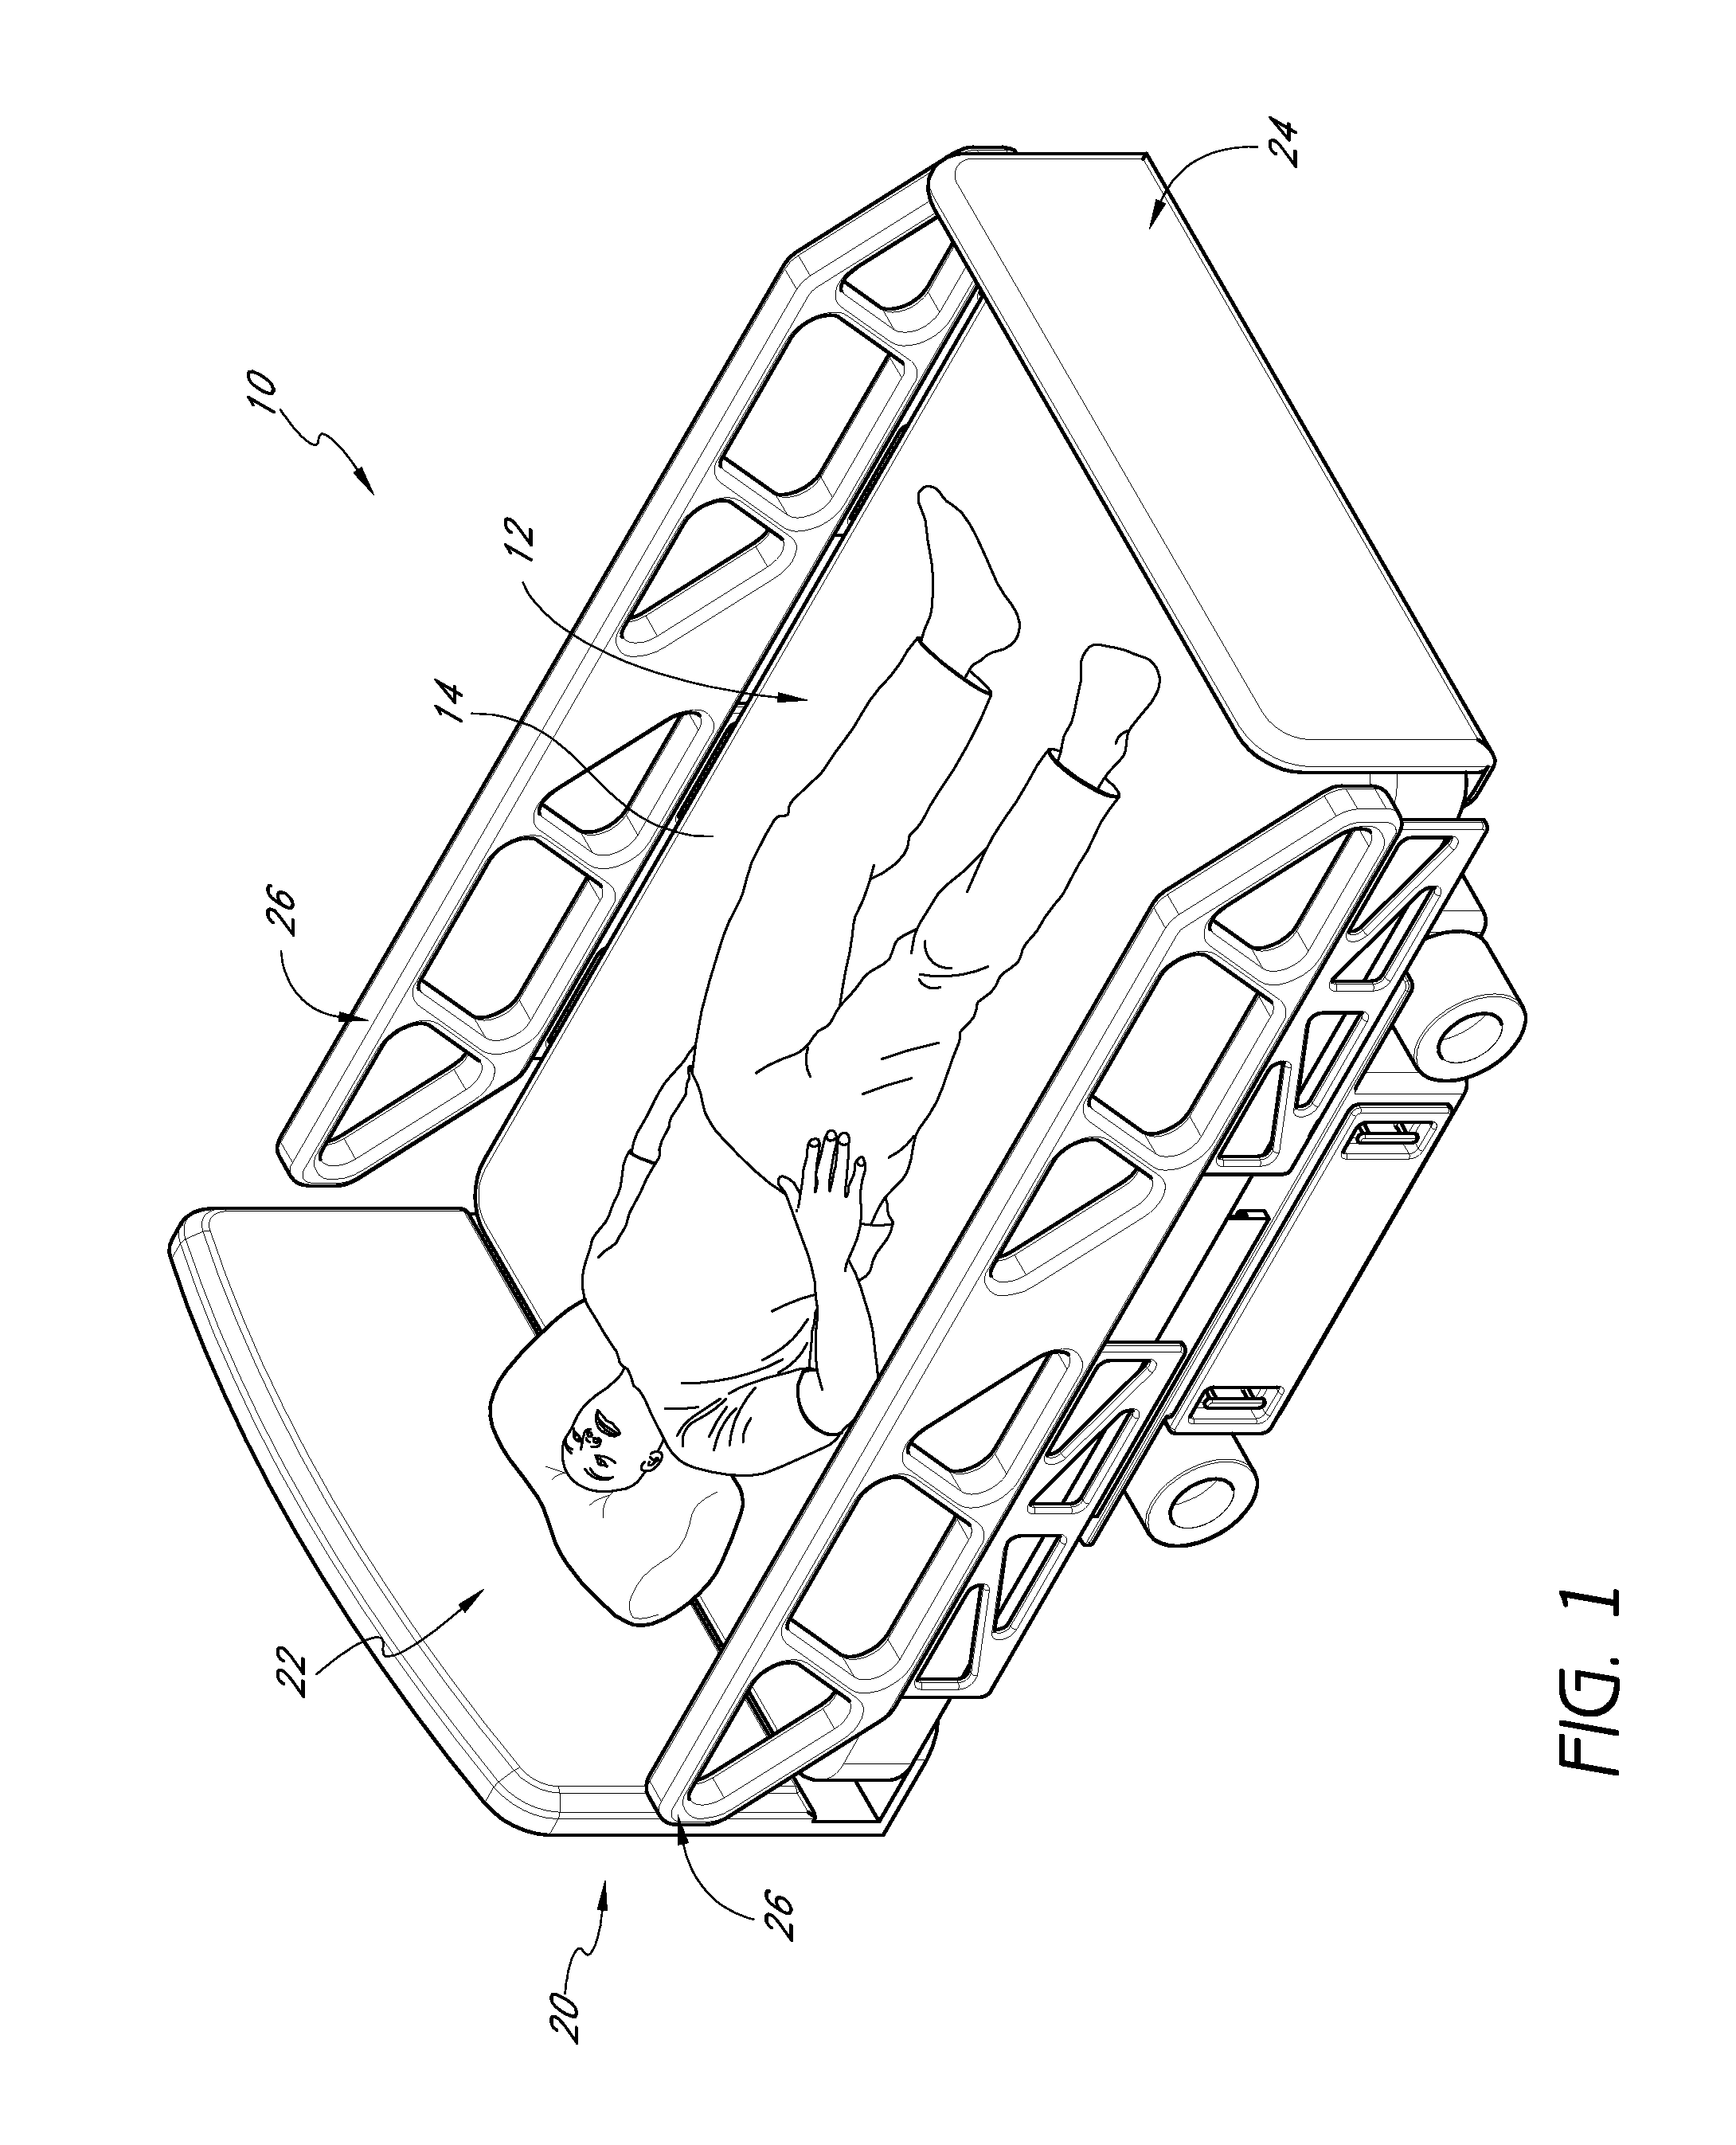 Patient safety system with automatically adjusting bed